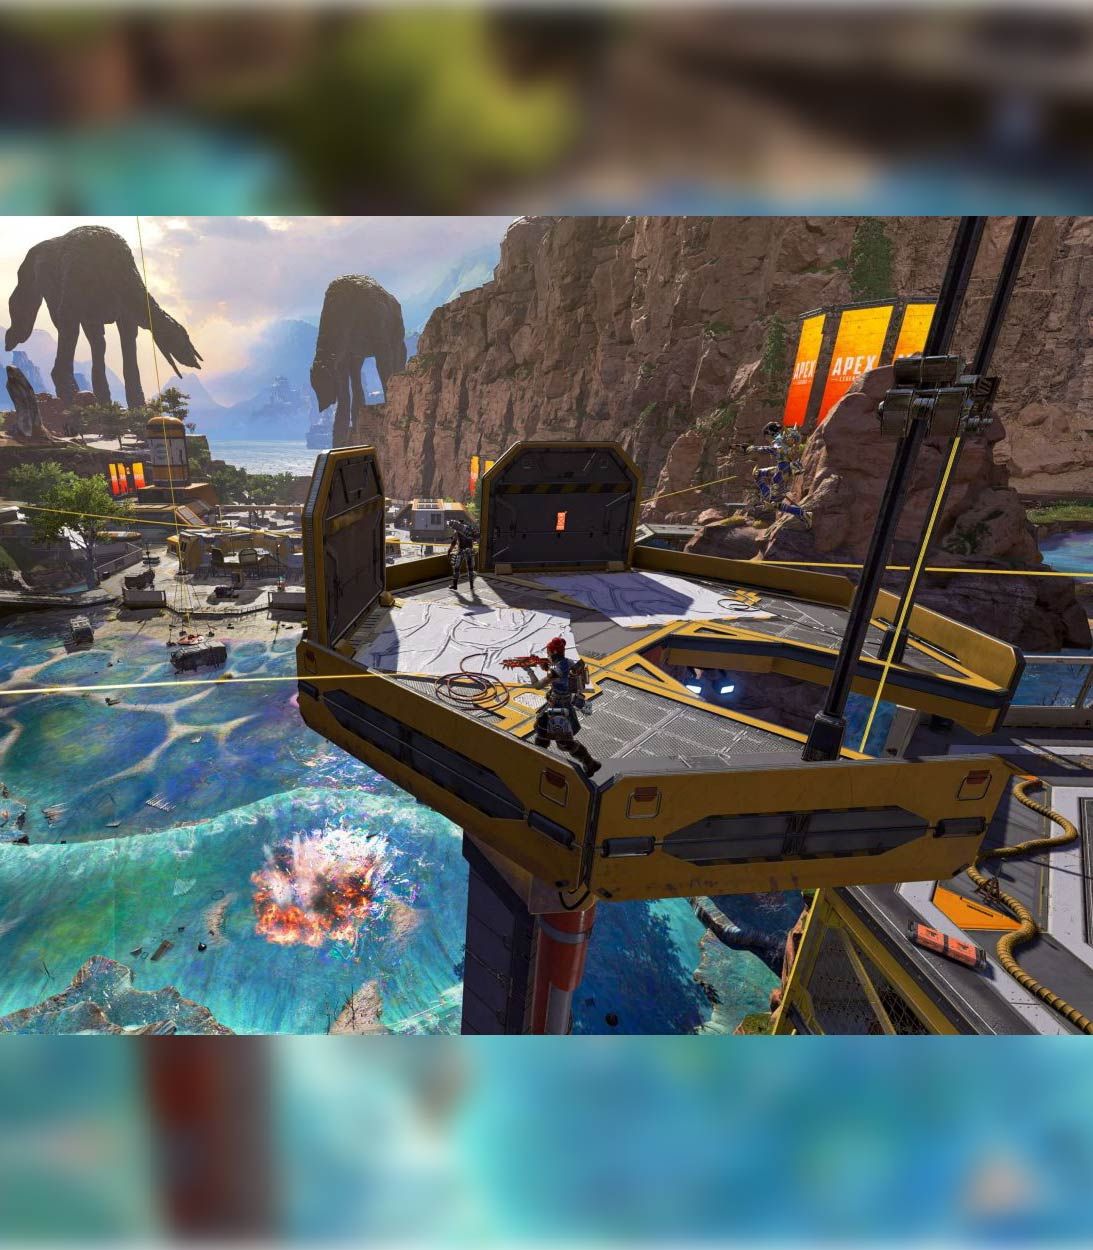 New observation towers in Apex Legends season 8